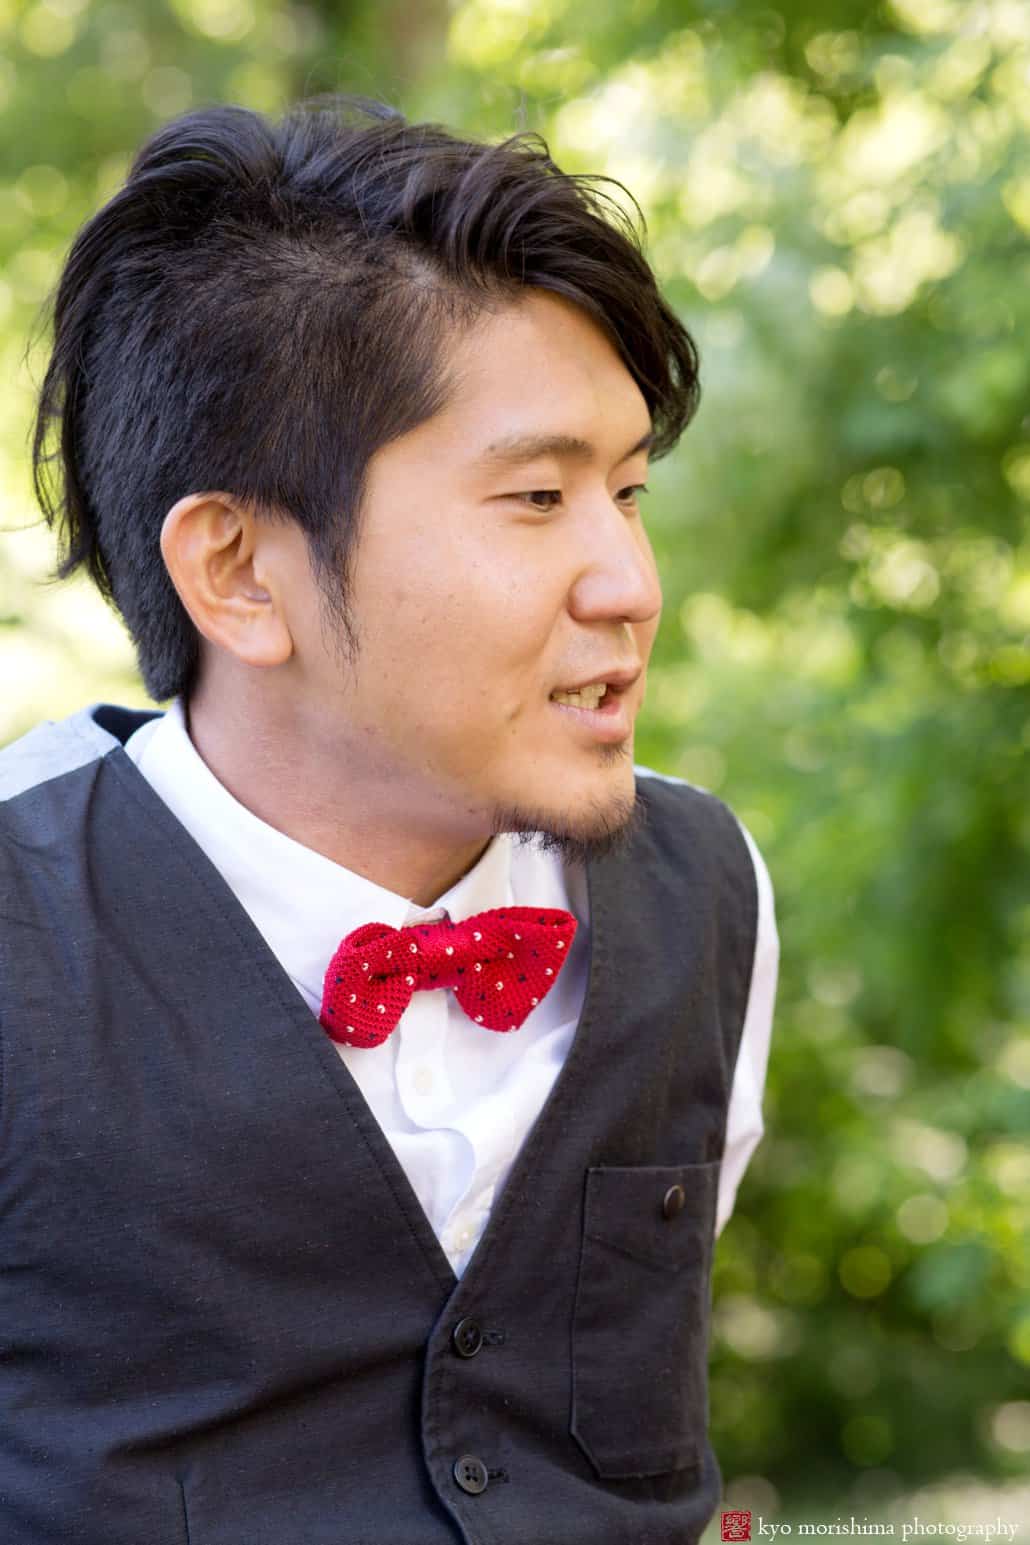 Japanese man wearing grey vest and red bow tie photographed by Kyo Morishima